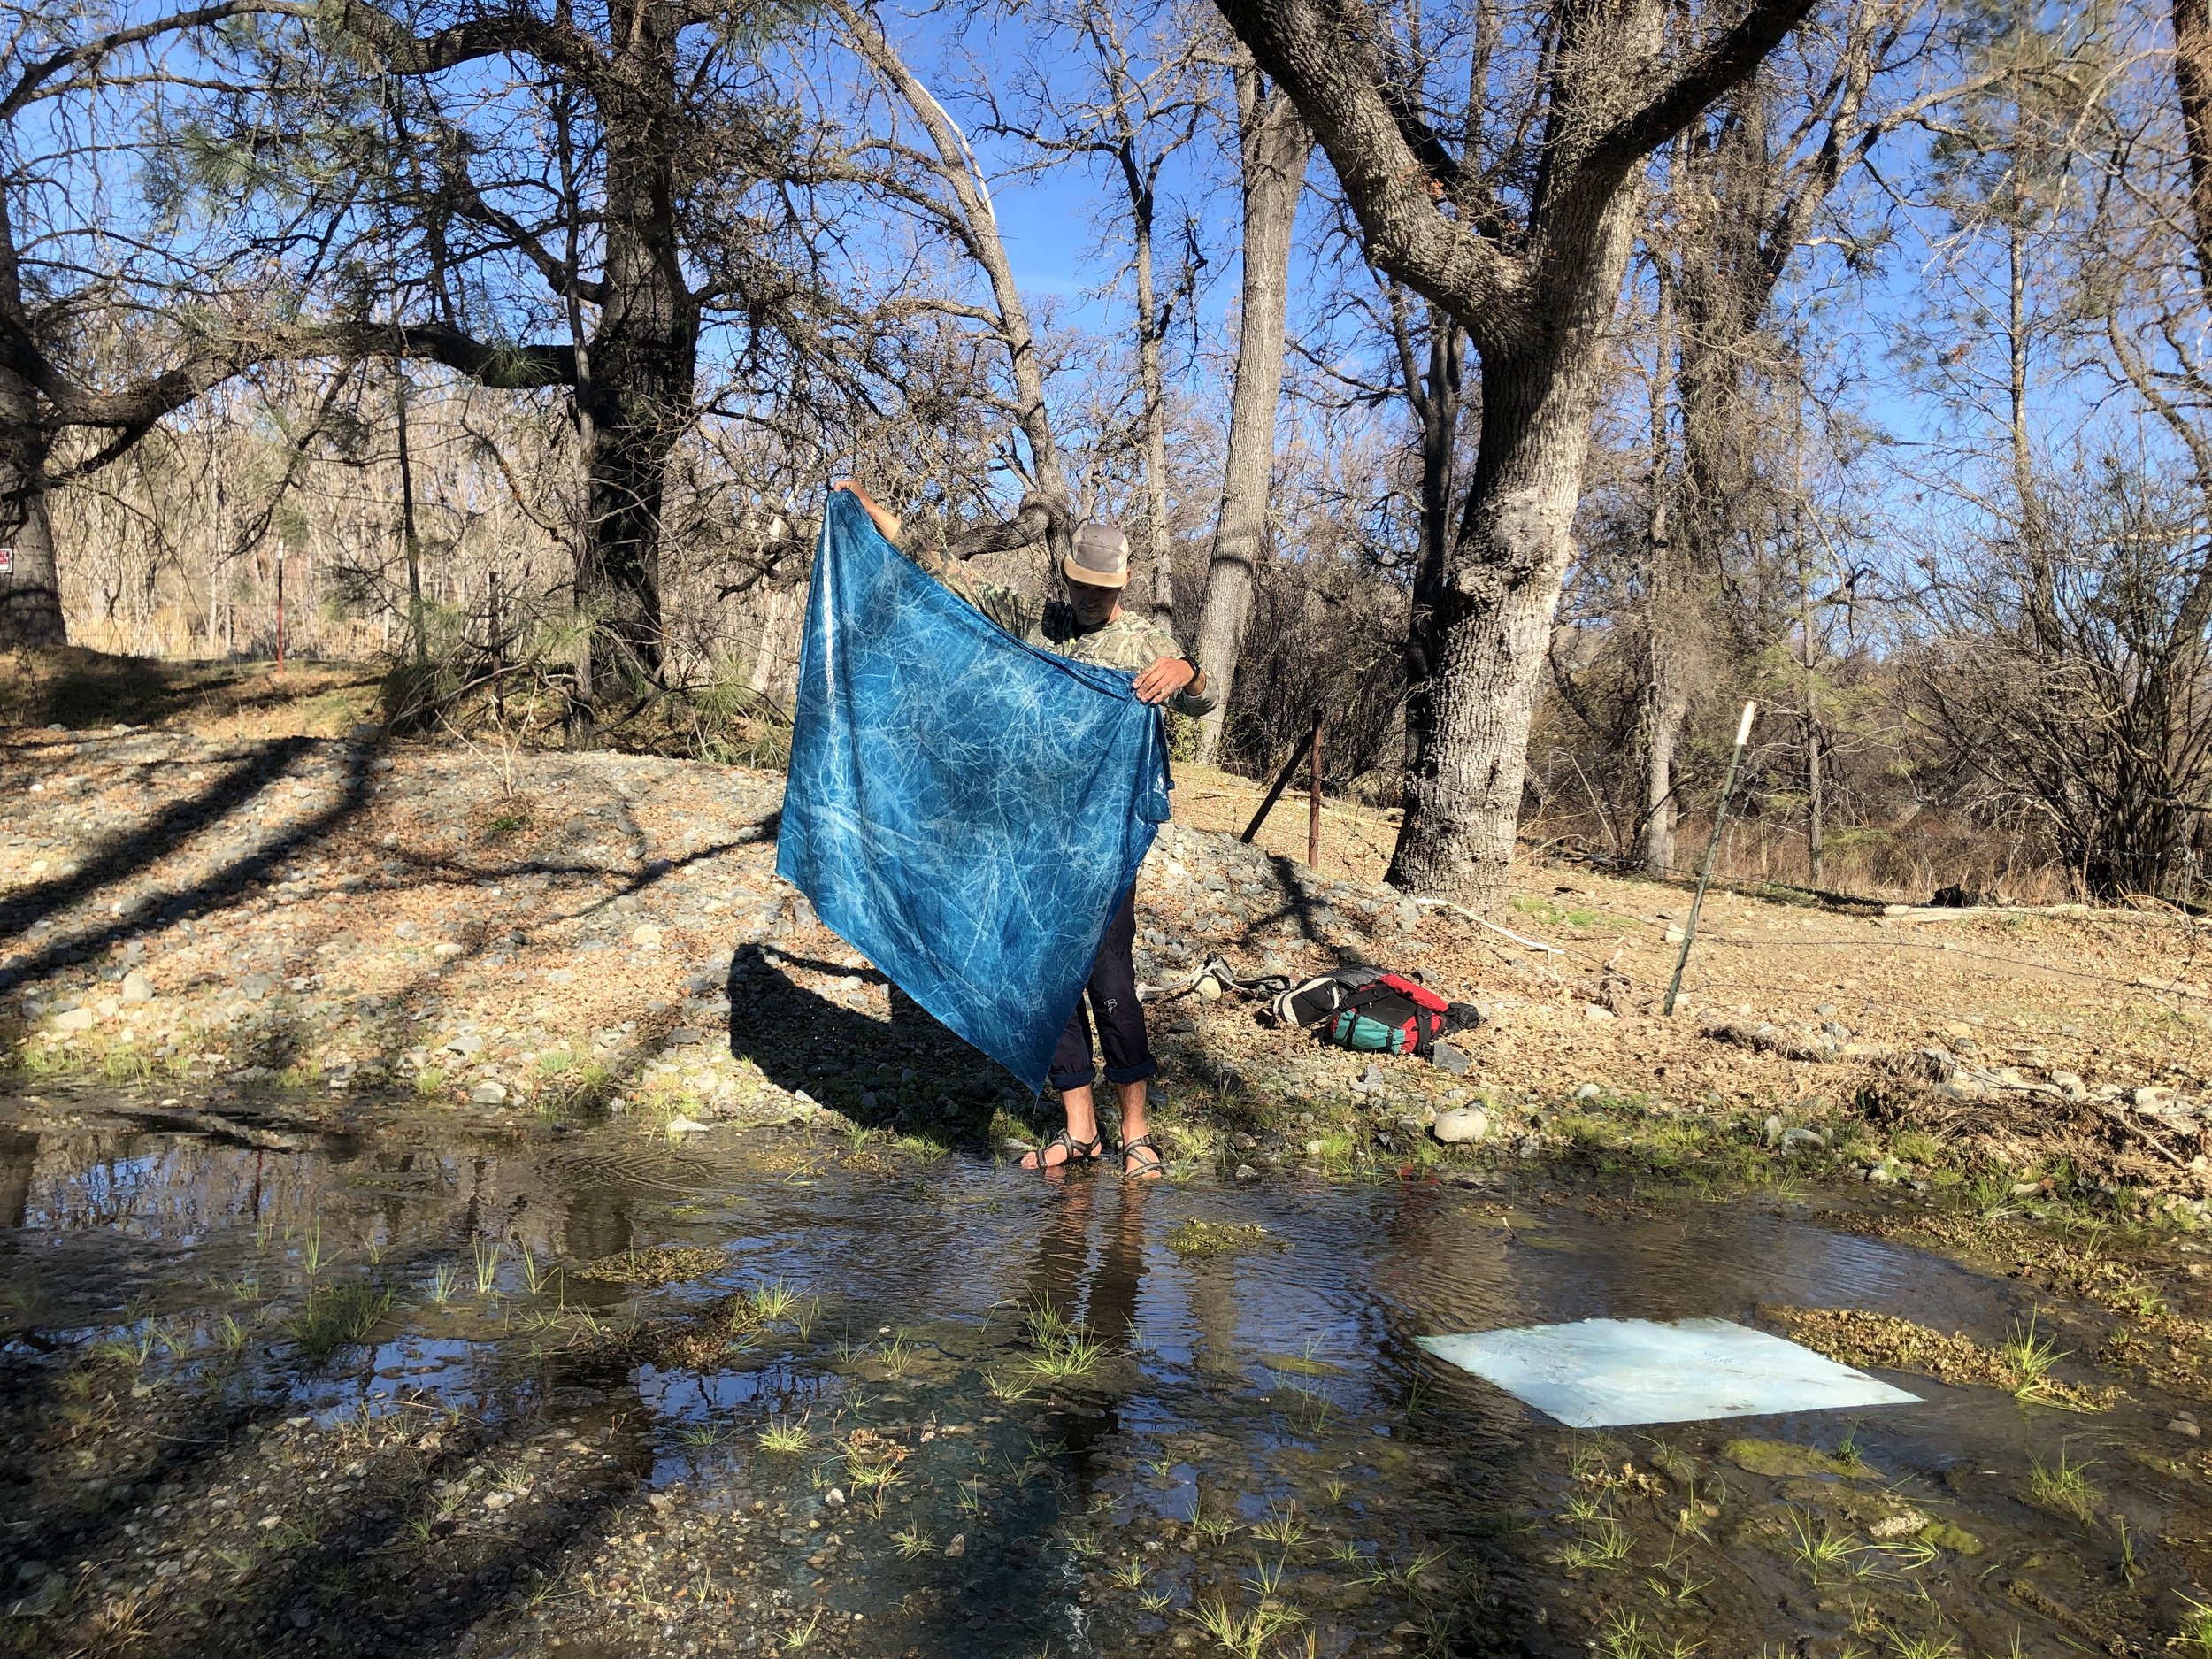 Processing and washing a cyanotype mural in a creek. 